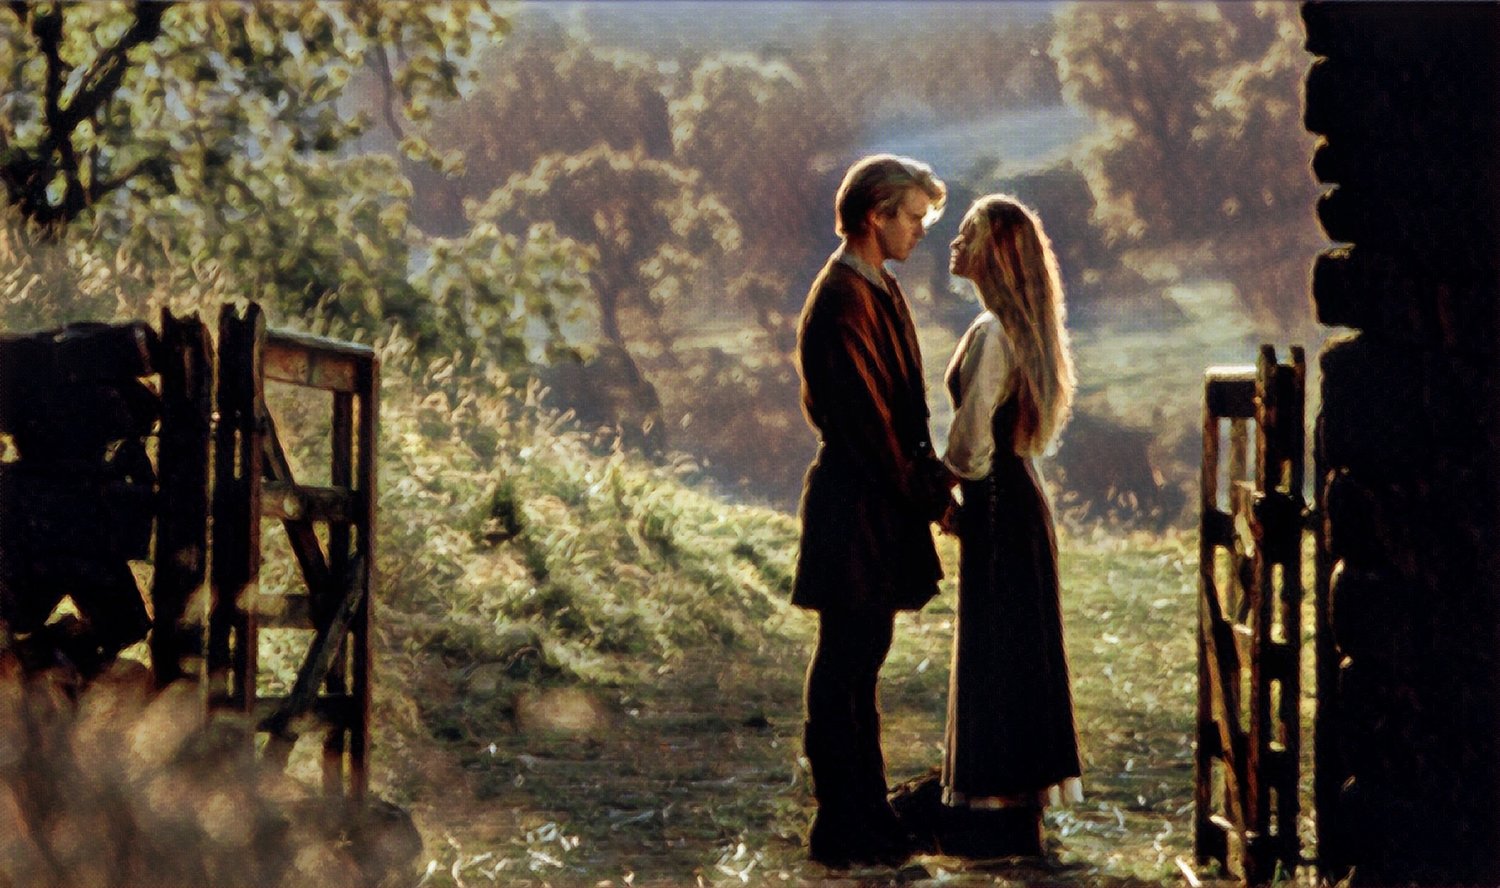 The Princess Bride, minutes 34 to 36